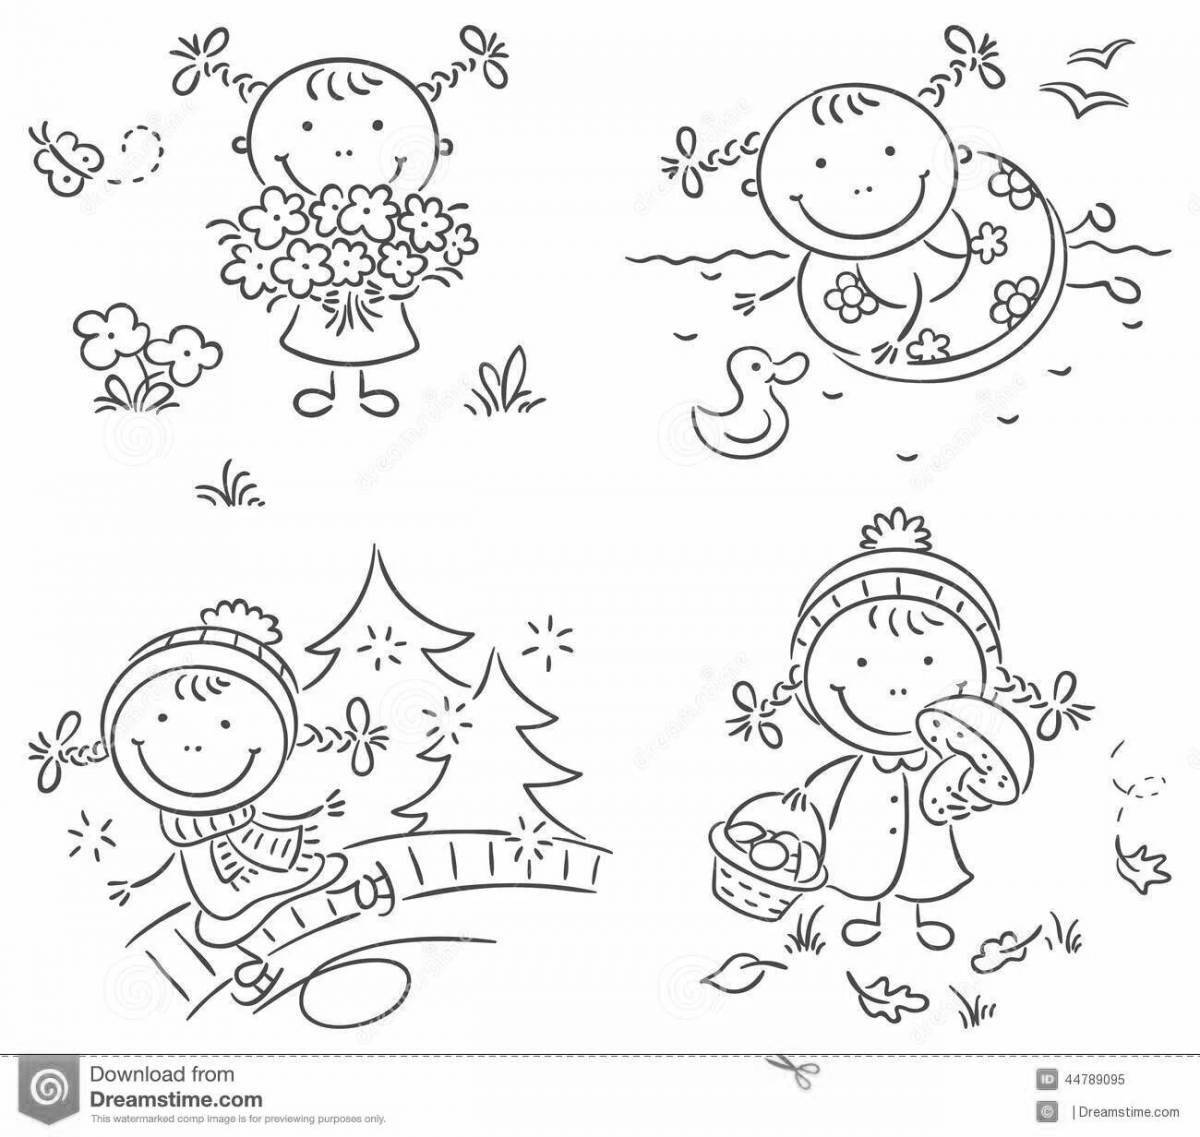 Great four wishes coloring book